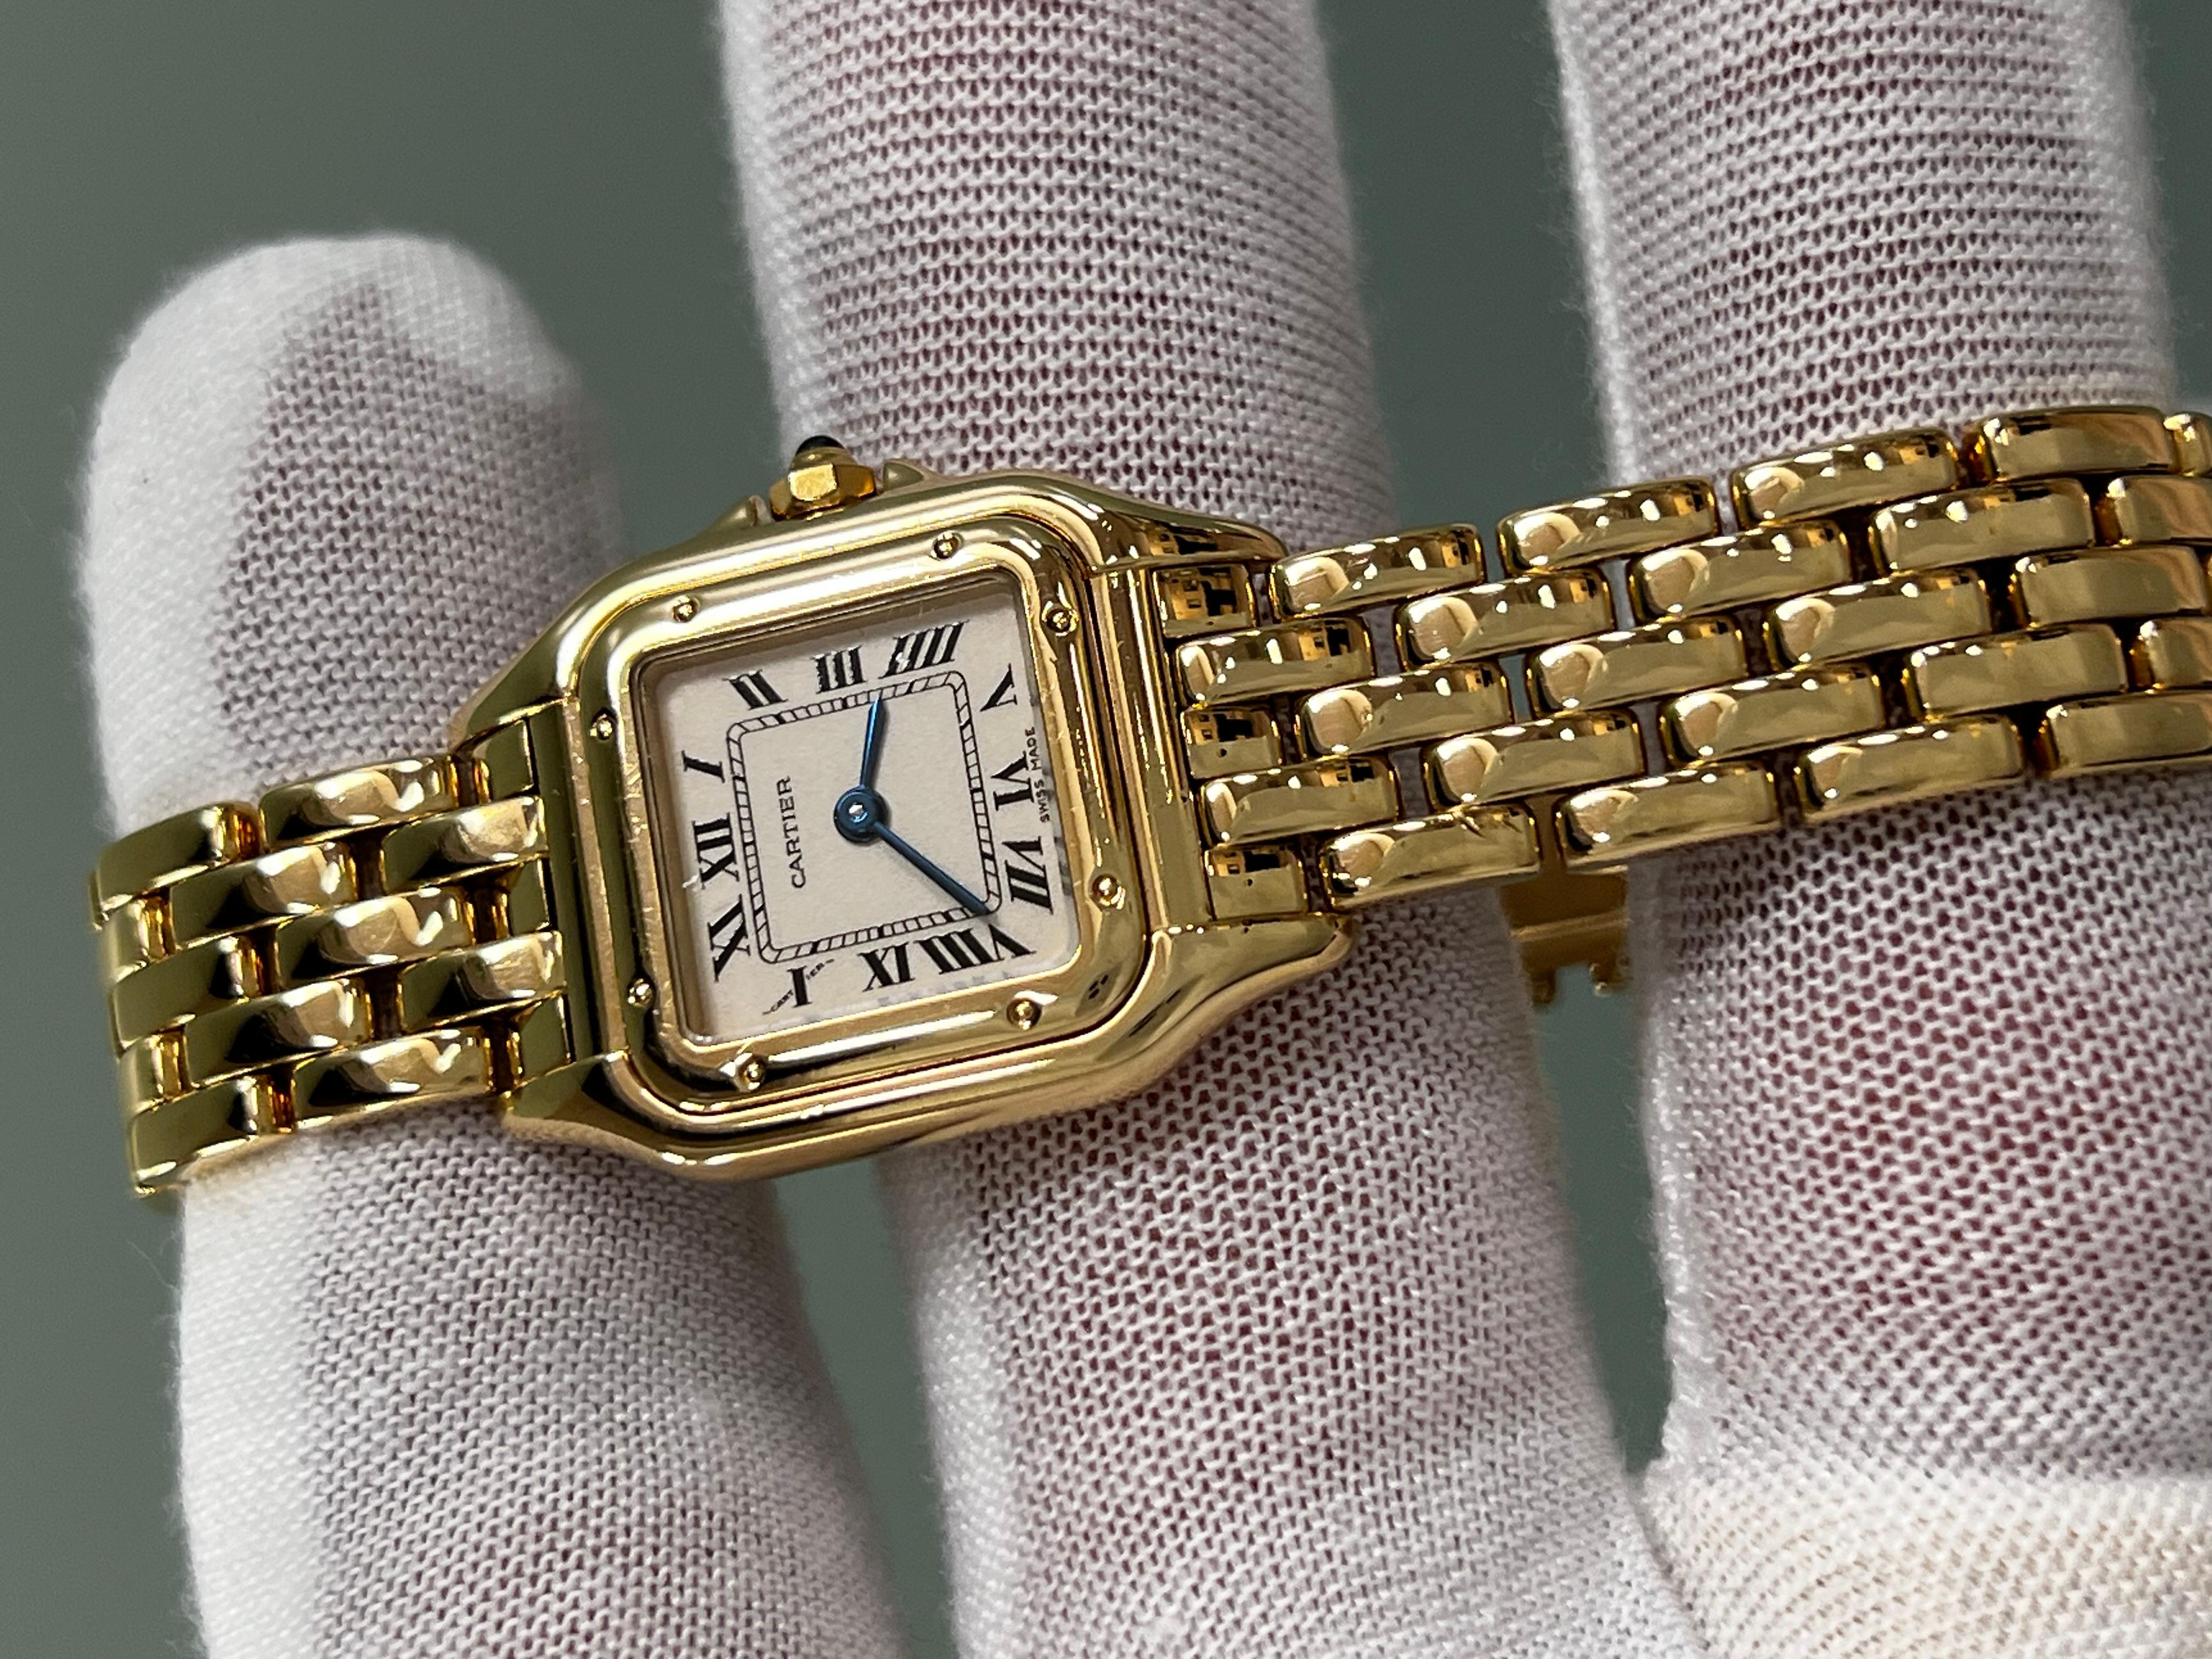 Style Number: 1070

 

Model: Panthere de Cartier 

 

Case Material: 18K Yellow Gold 

 

Band:  18K Yellow Gold 

 

Bezel:   18K Yellow Gold 

 

Face: Sapphire Crystal 

 

Case Size: 22mm 

 

Includes: 

-Elegant Watch Box

-Certified